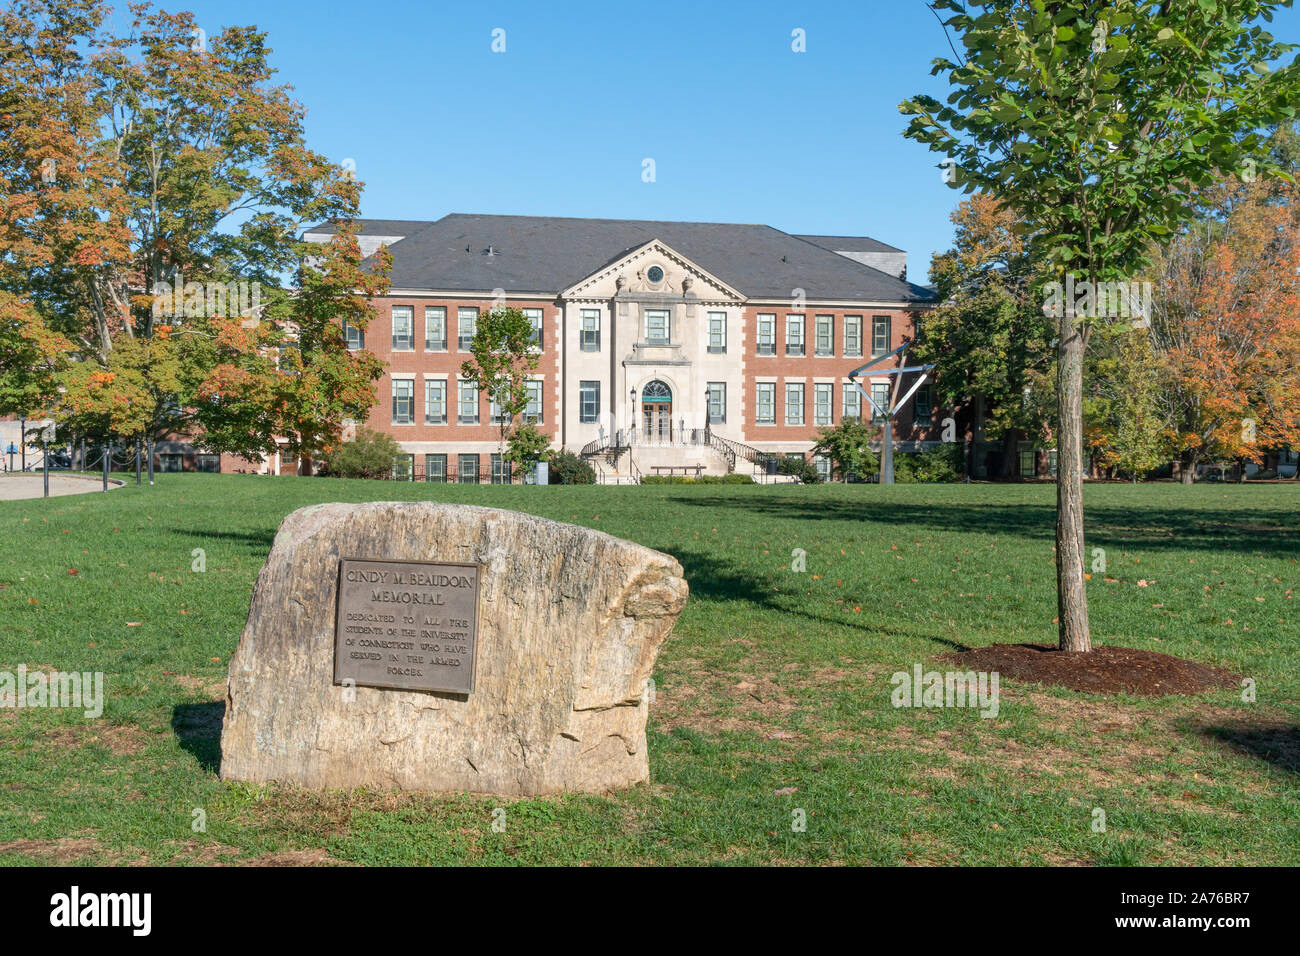 STORRS, CT/USA - SEPTEMBER 27, 2019: Cindy M. Meaudoin Memorial on the campus of the University Connecticut. Stock Photo